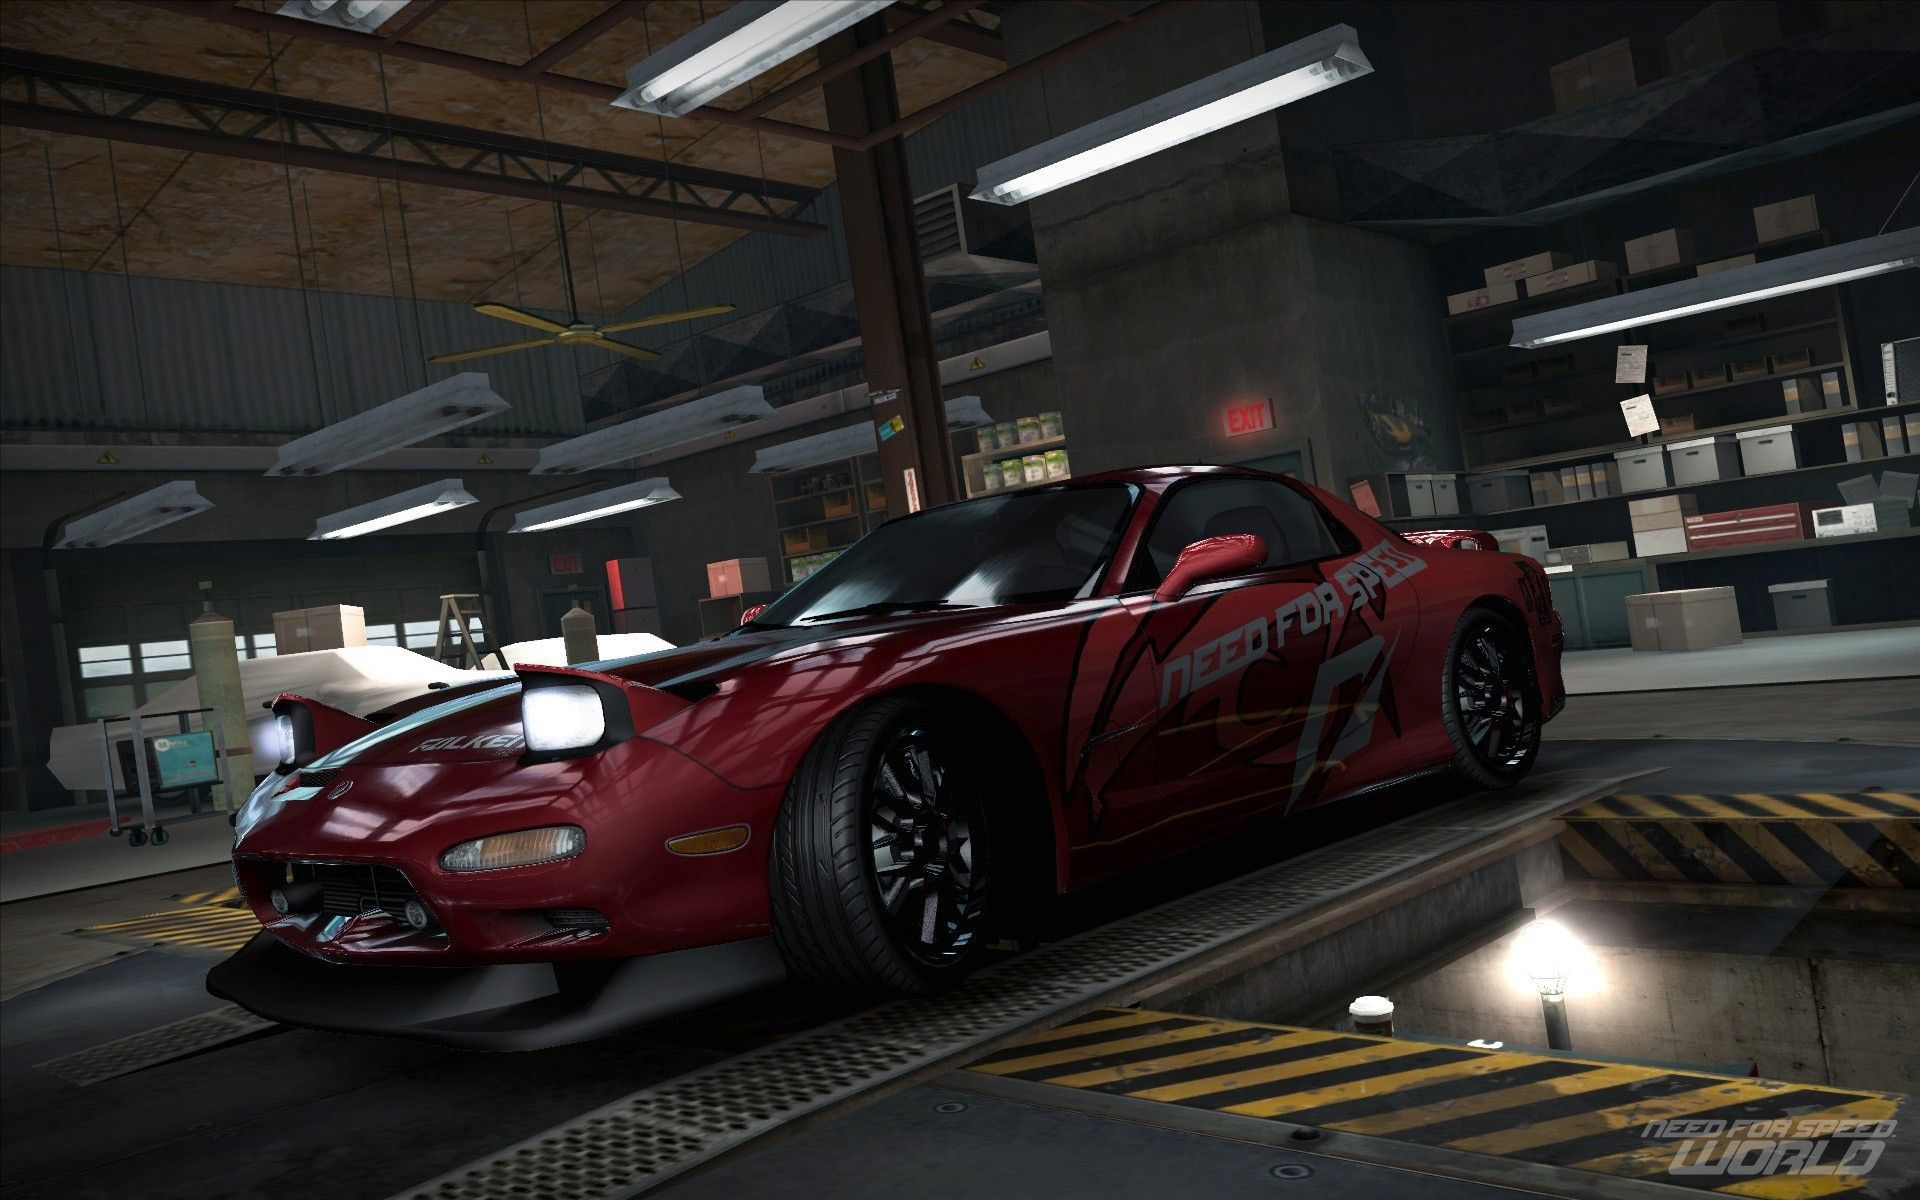 Wallpaper Of Mazda Rx7 Need For Speed World